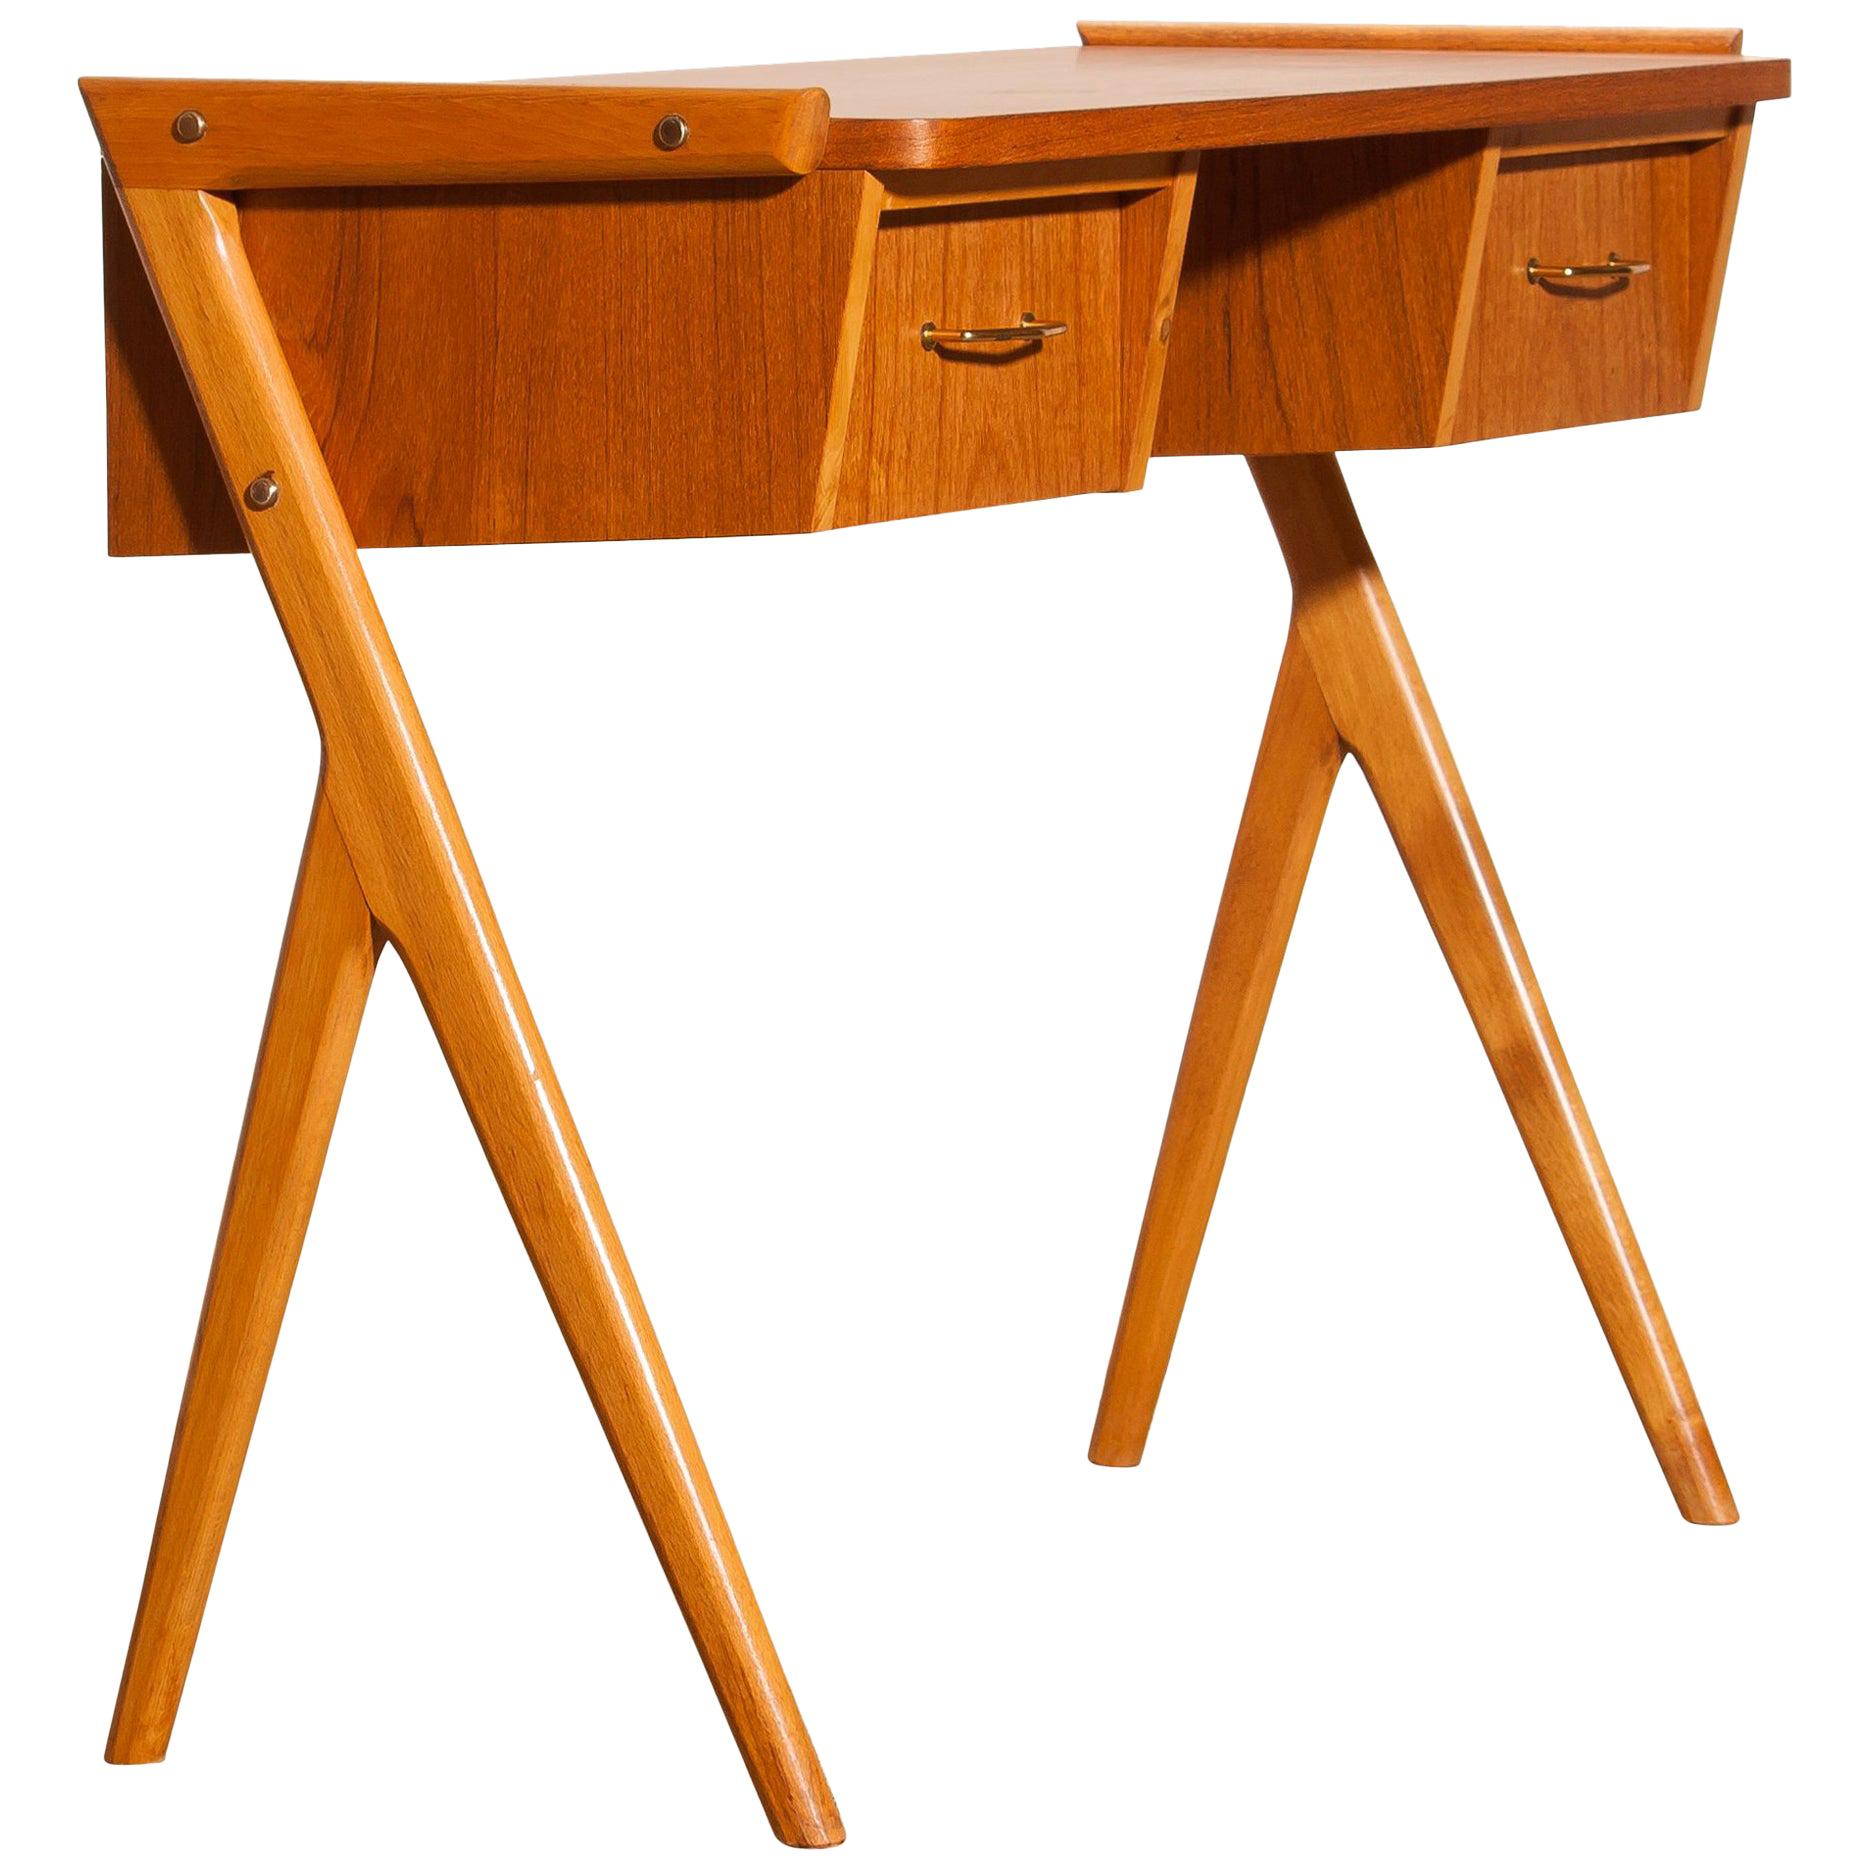 Very beautiful vanity or ladies desk from Sweden
The table is made of teak and has two drawers with brass details.
It is in a very nice condition.
Period, 1950s.
Dimensions: H 70 cm, W 84 cm, D 40 cm.